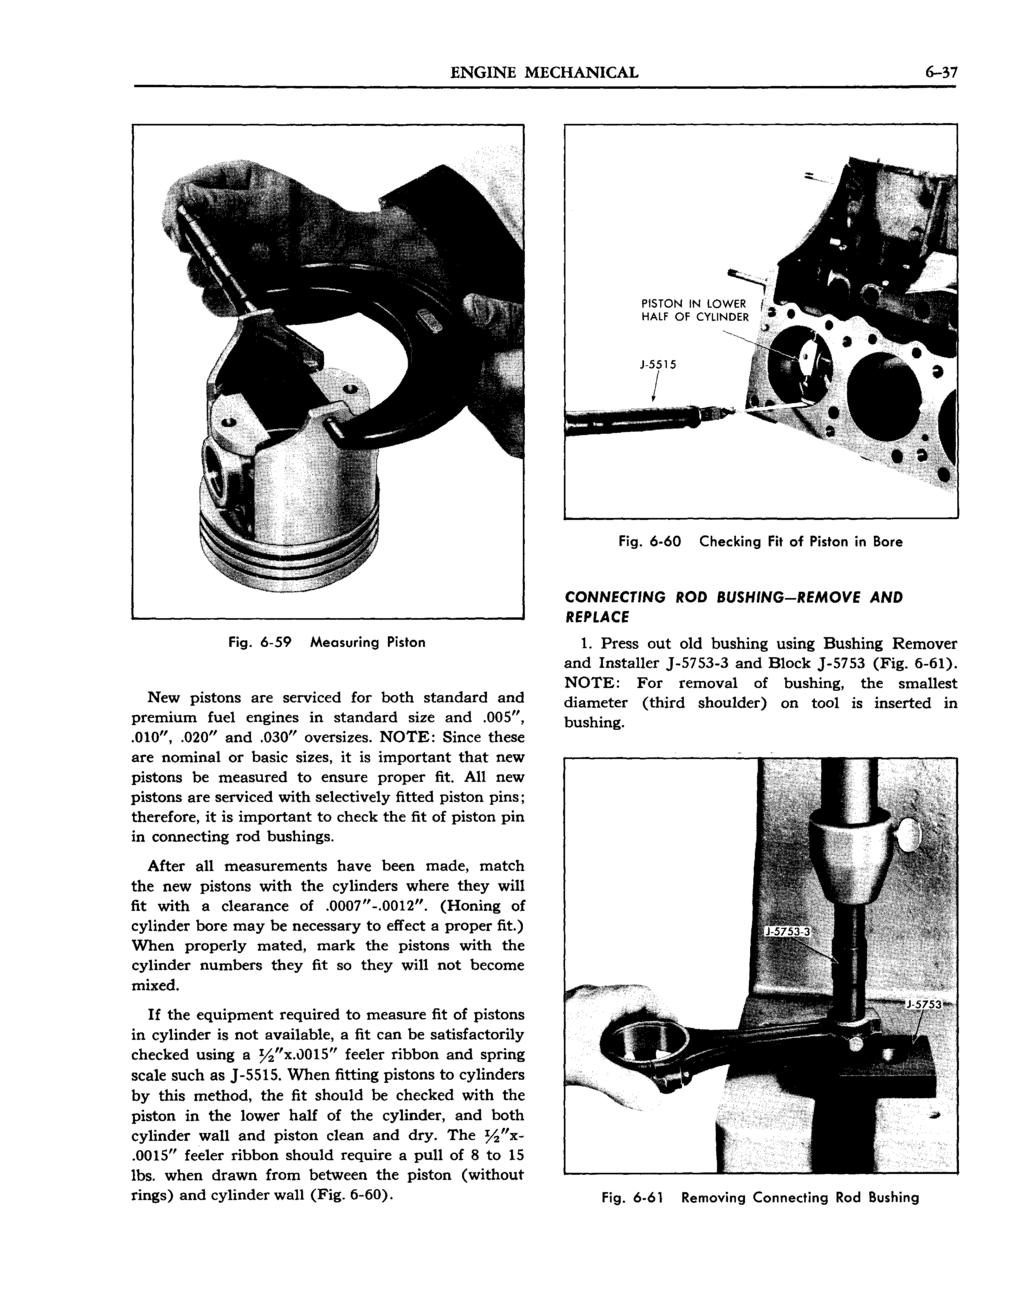 ENGINE MECHANICAL 6-37 PISTON IN LOWER HALF OF CYLINDER Fig. 6-60 Checking Fit of Piston in Bore Fig.